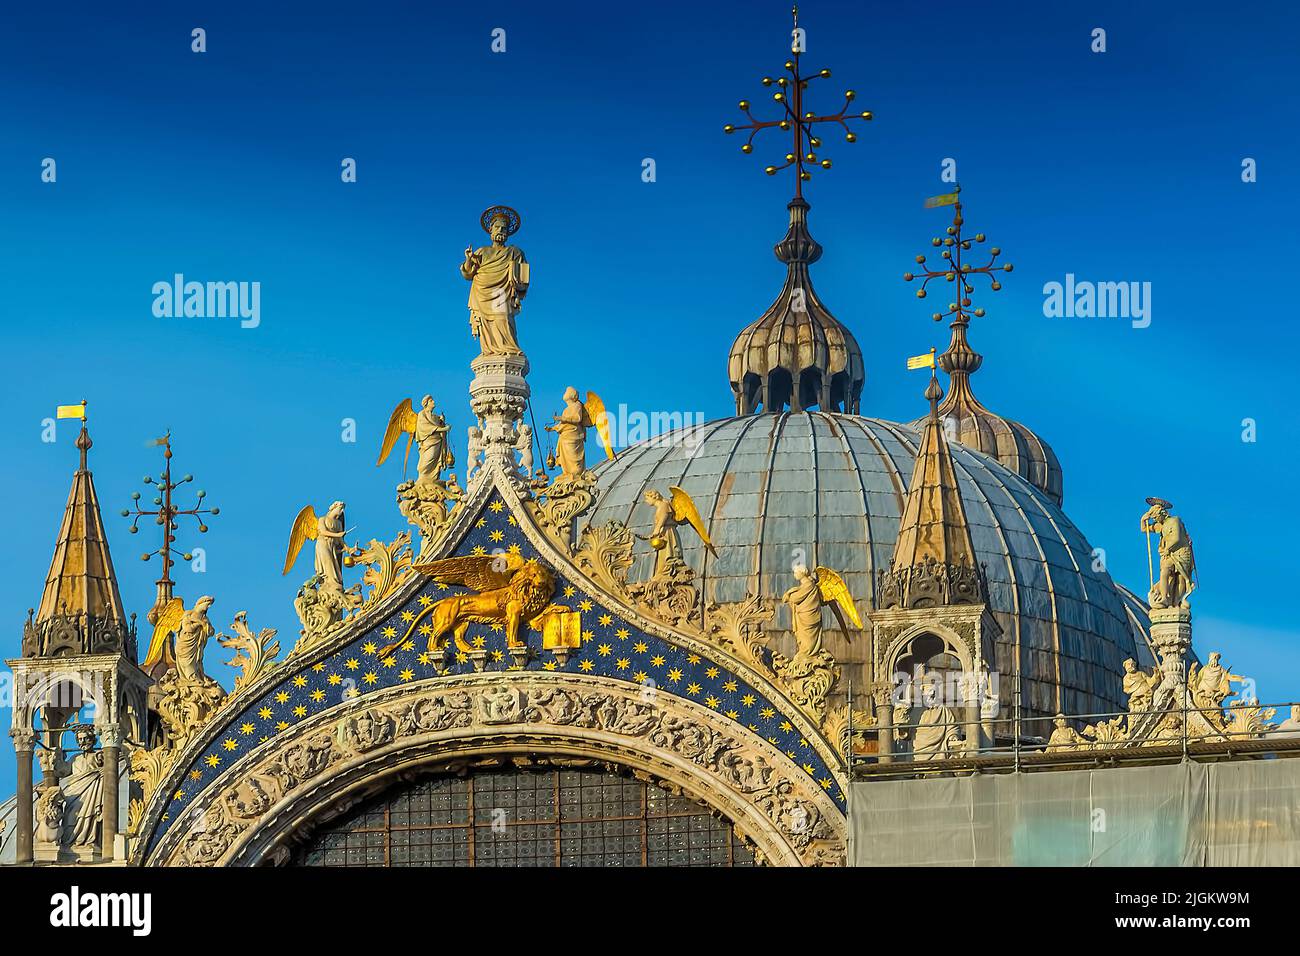 Beautiful roof ornaments of the Basilica di San Marco in Venice, Italy Stock Photo